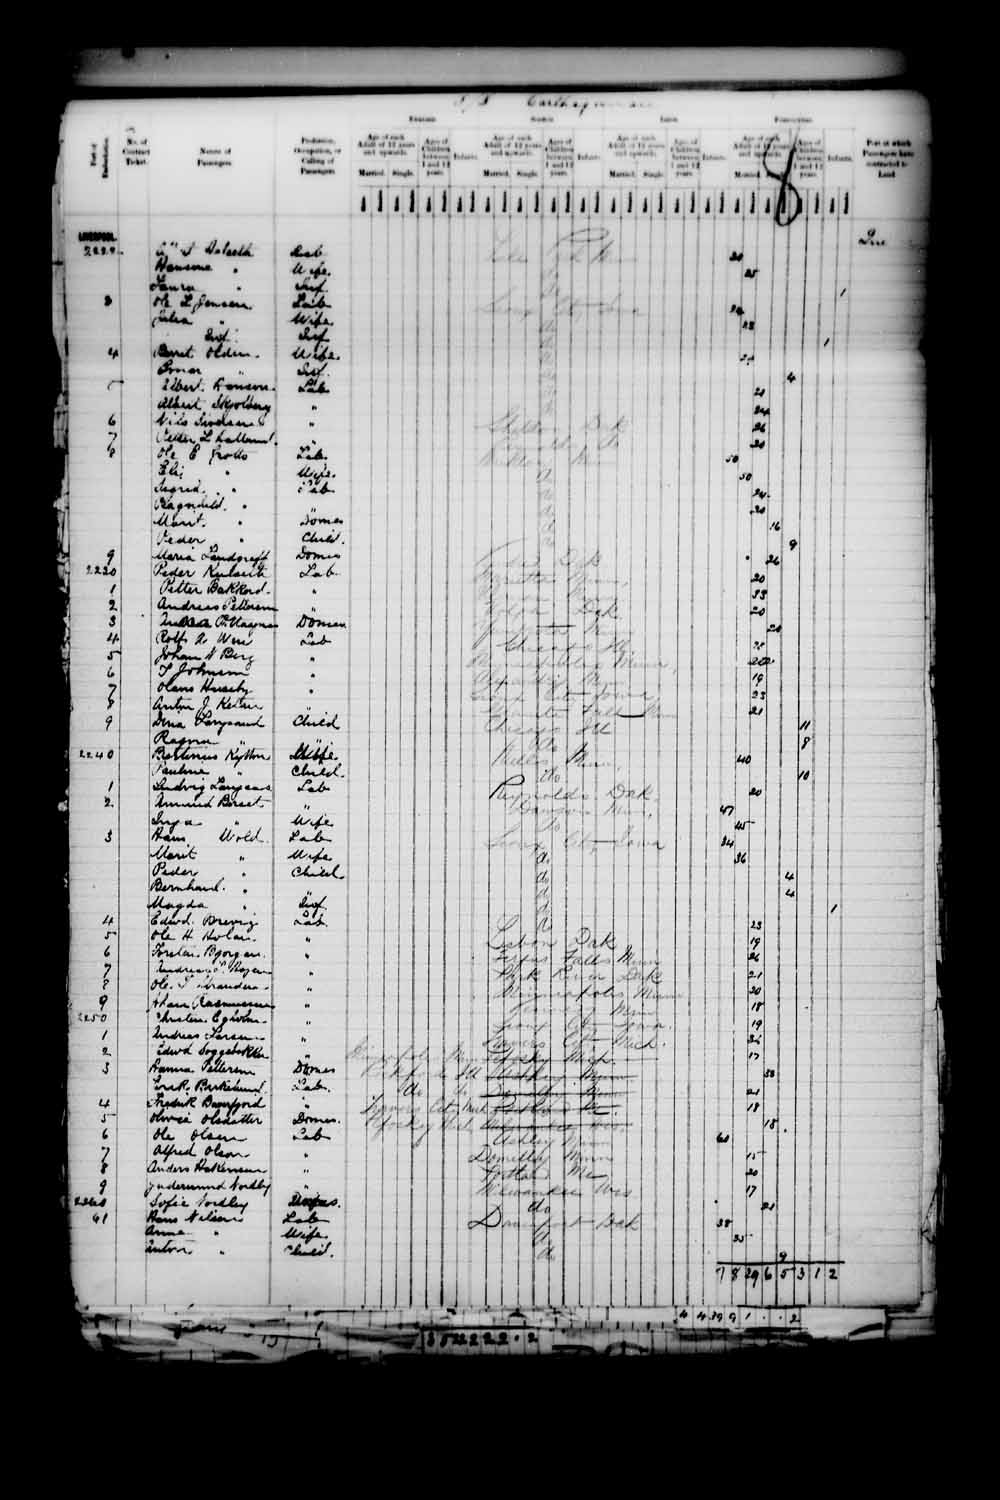 Digitized page of Passenger Lists for Image No.: e003546738